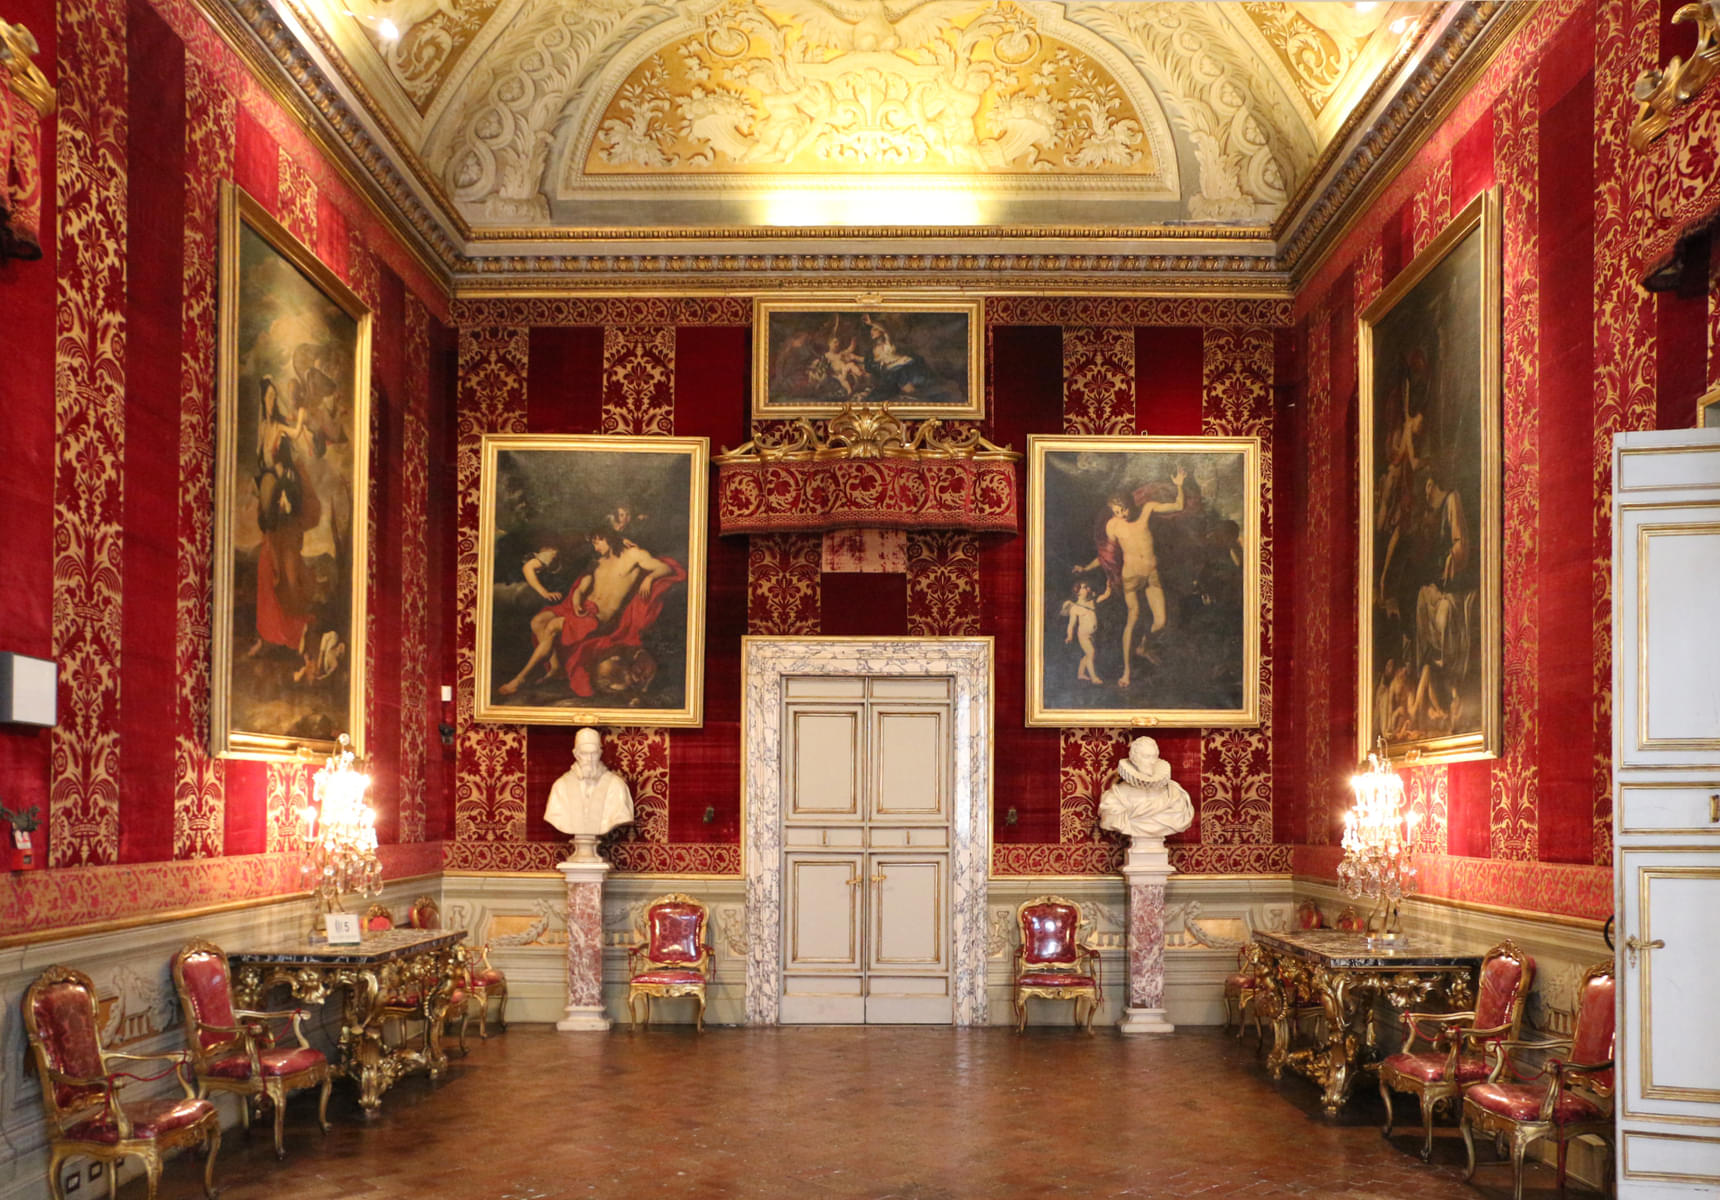 See the magnificent interior of the gallery